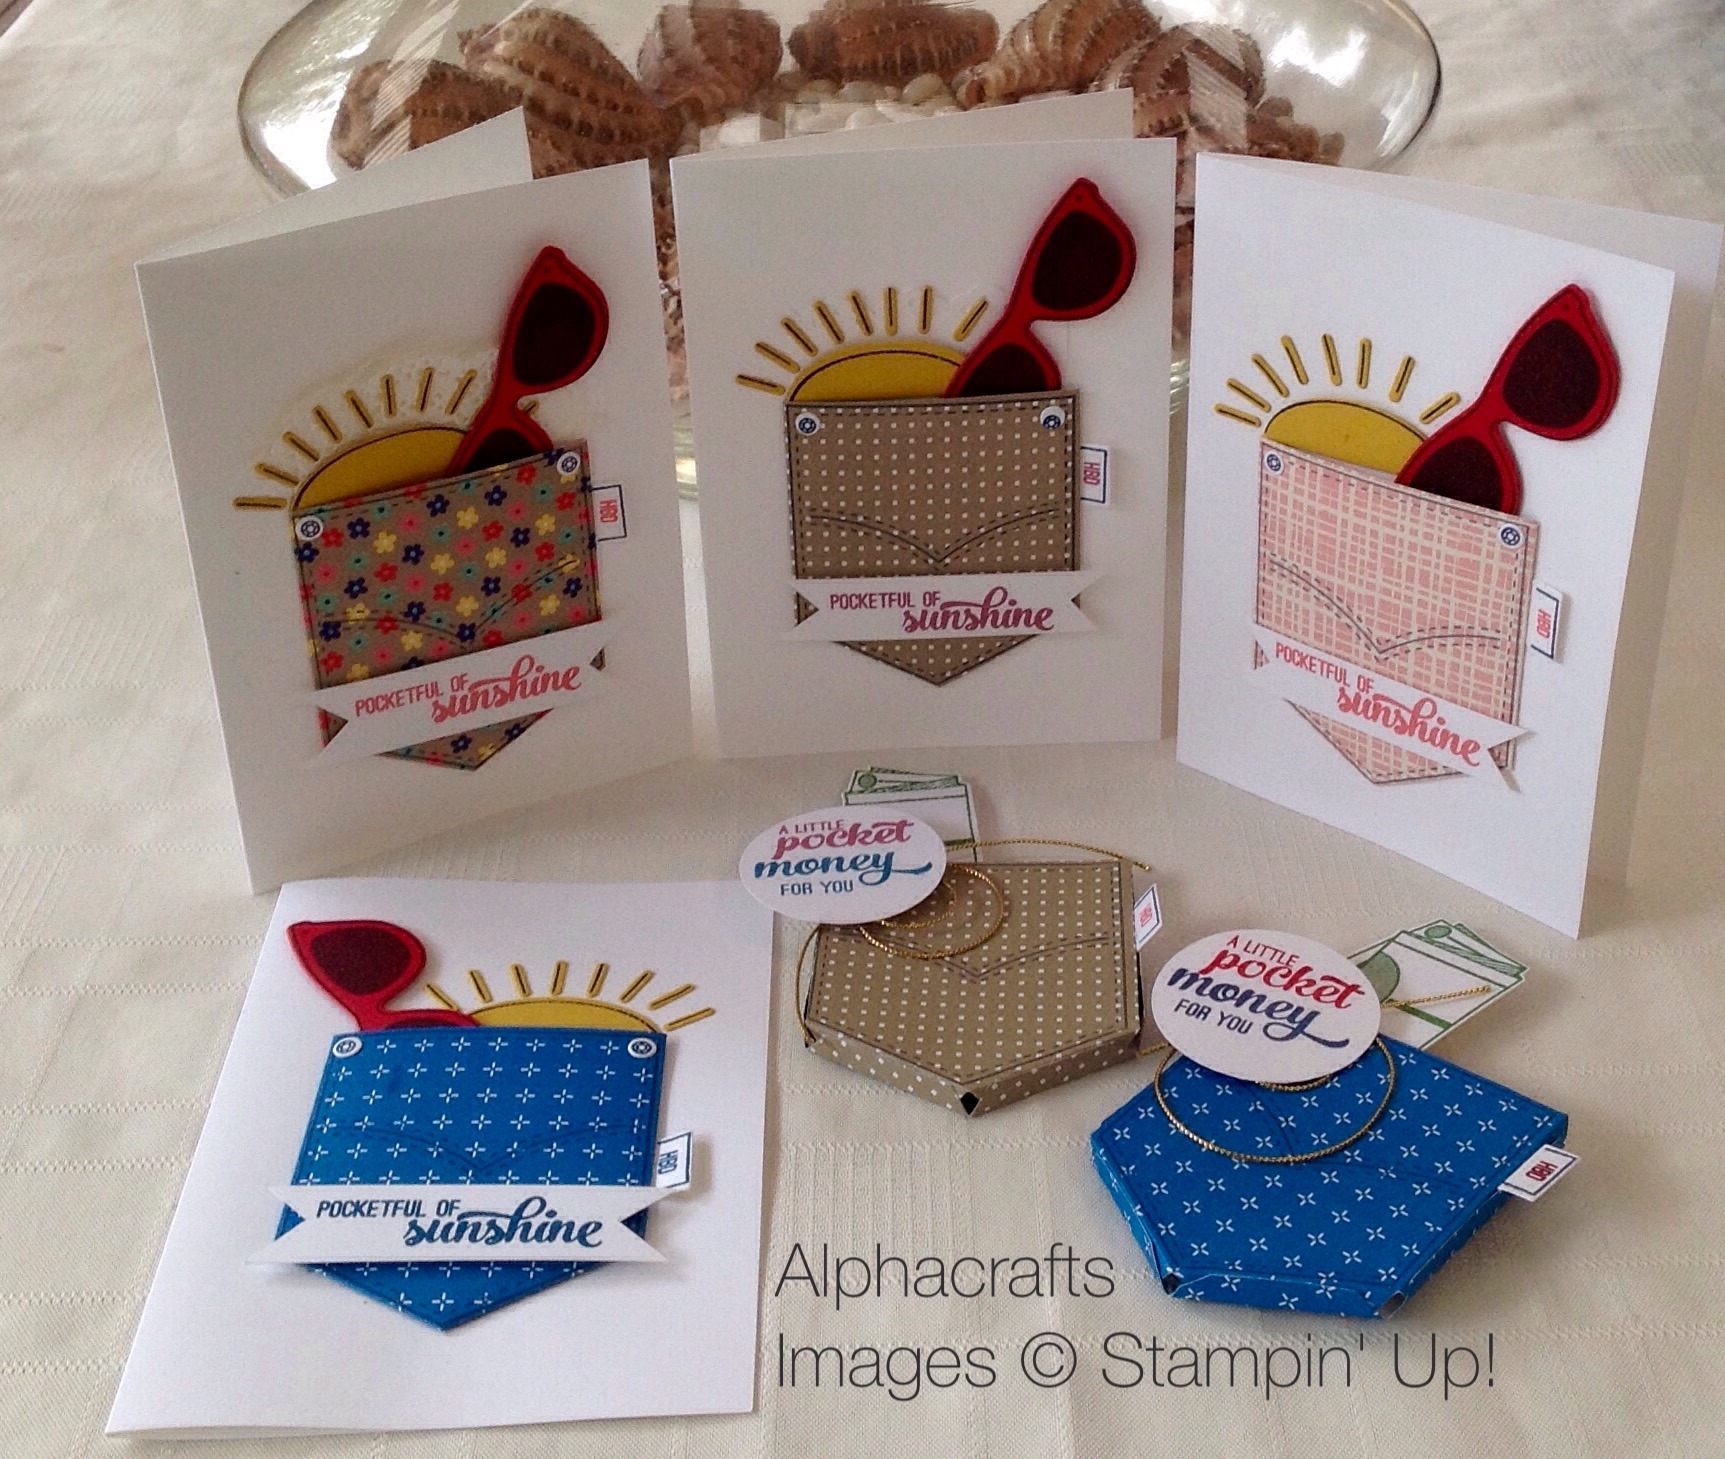 Handmade cards using the Pocketful of Sunshine stamp set and coordinating dies from Stampin' Up!.